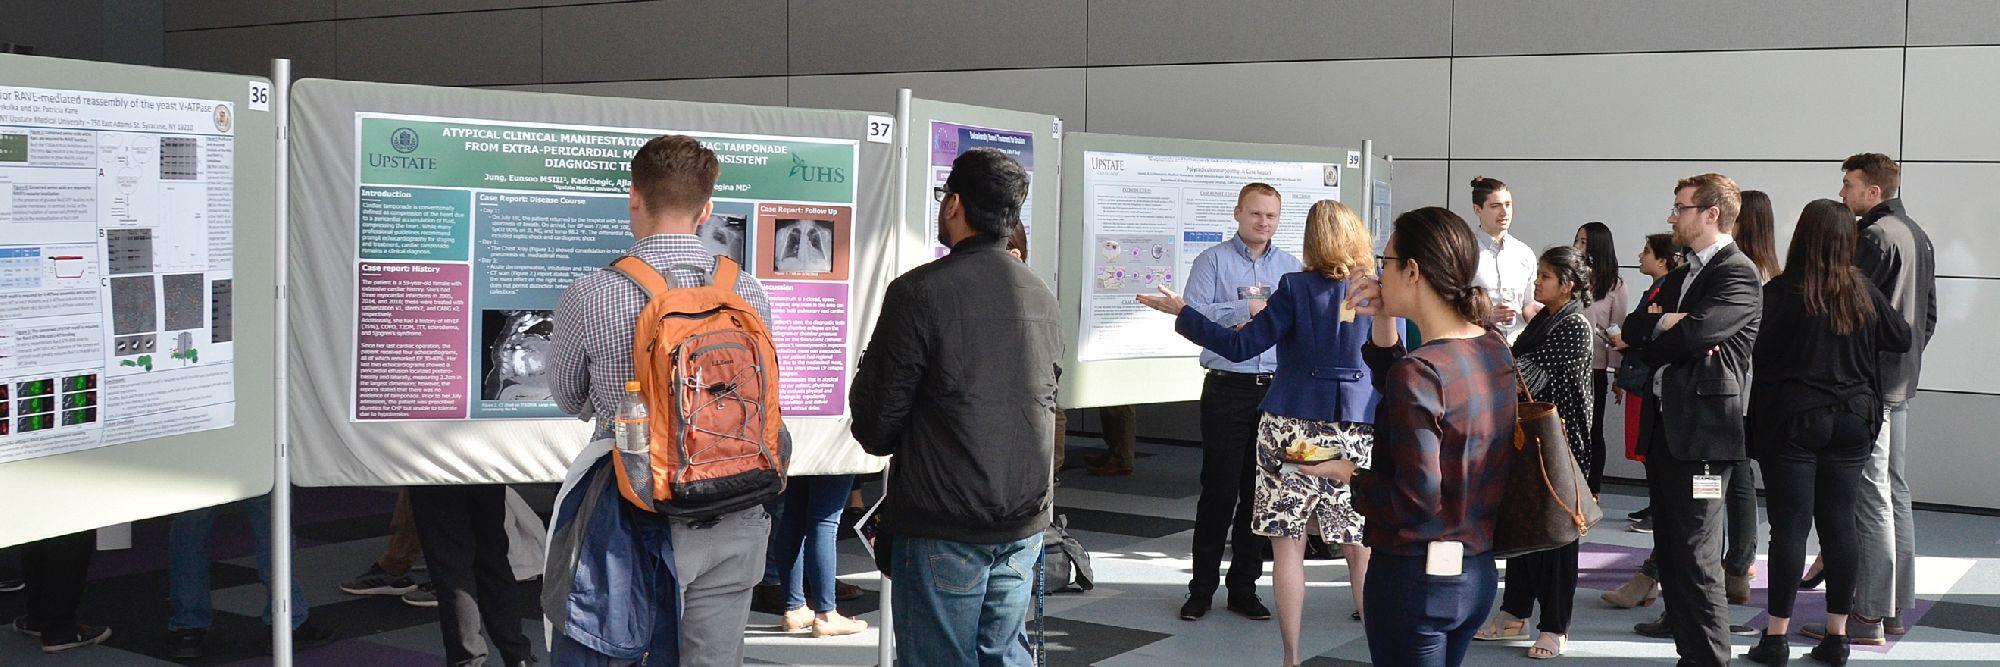 Research poster presentations